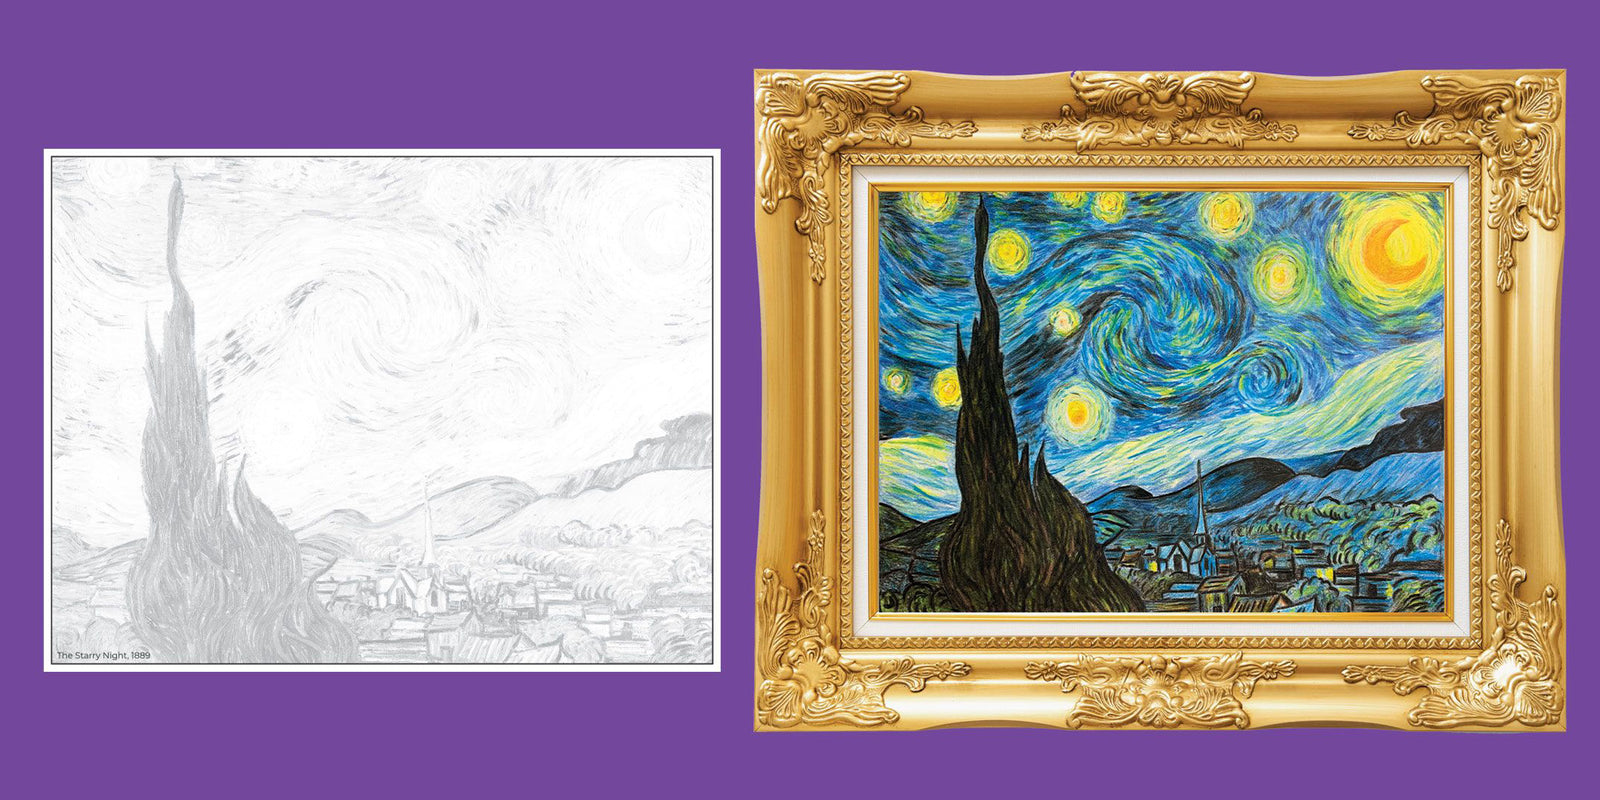 Van Gogh's Starry Night colored by colored pencils, in a frame